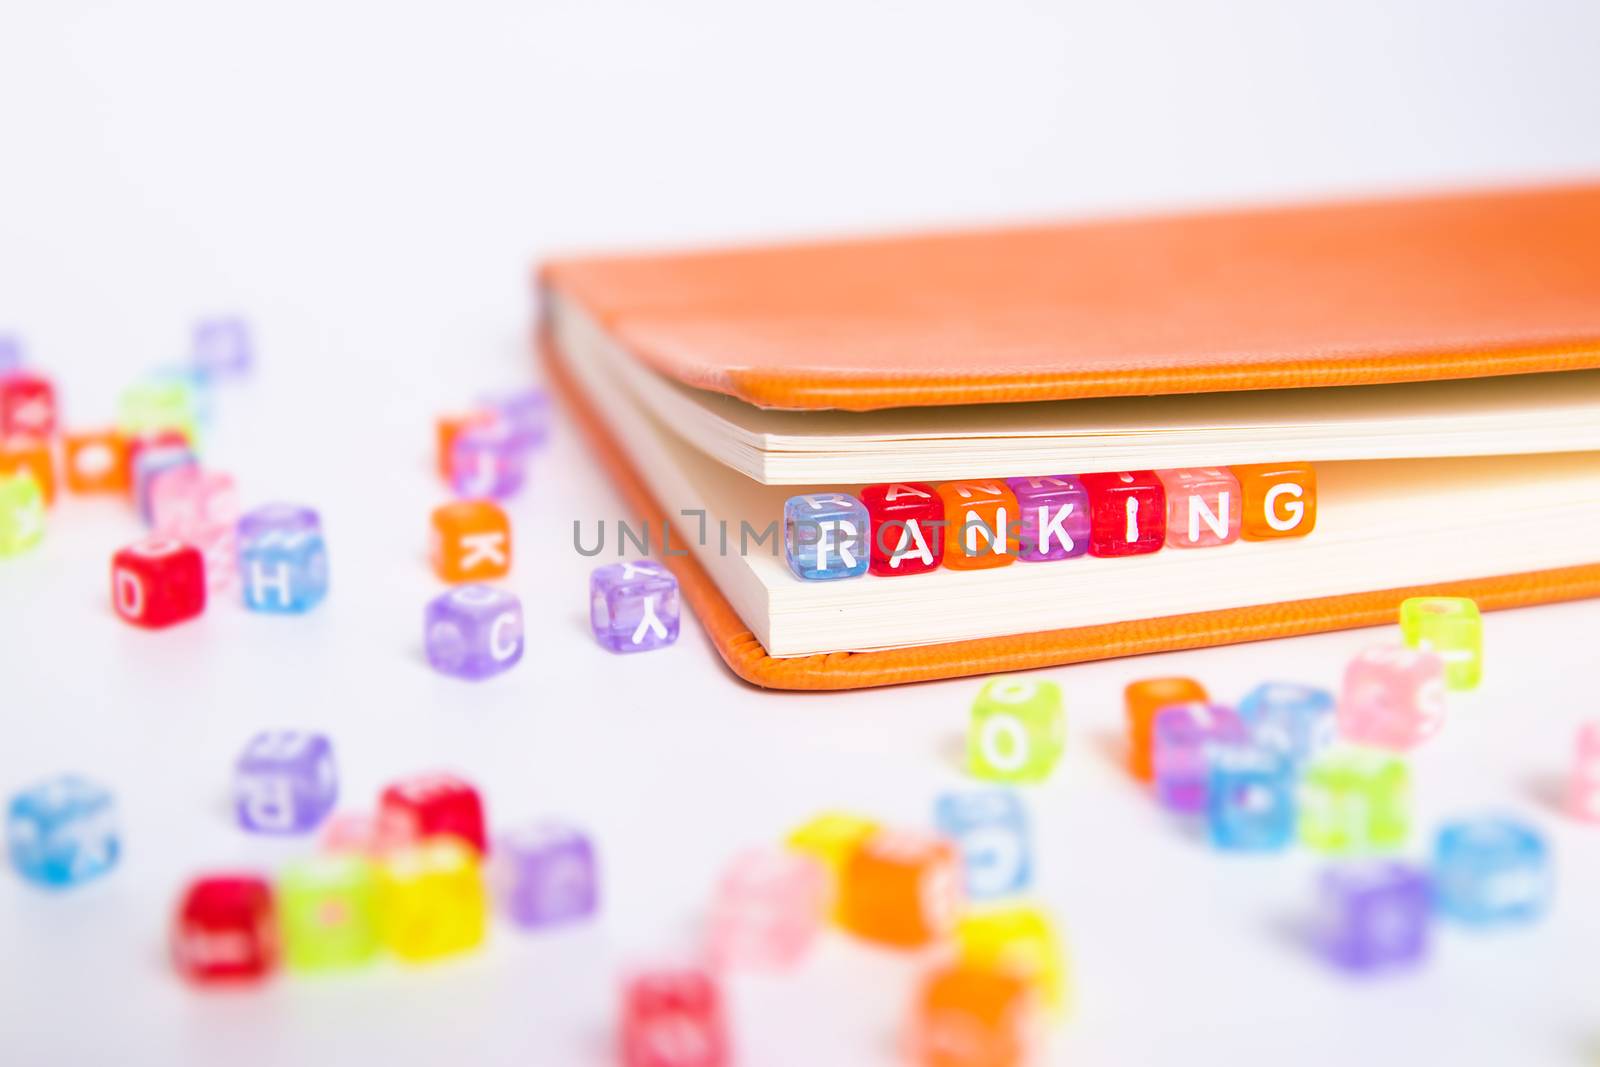 RANKING word written on colorful bead